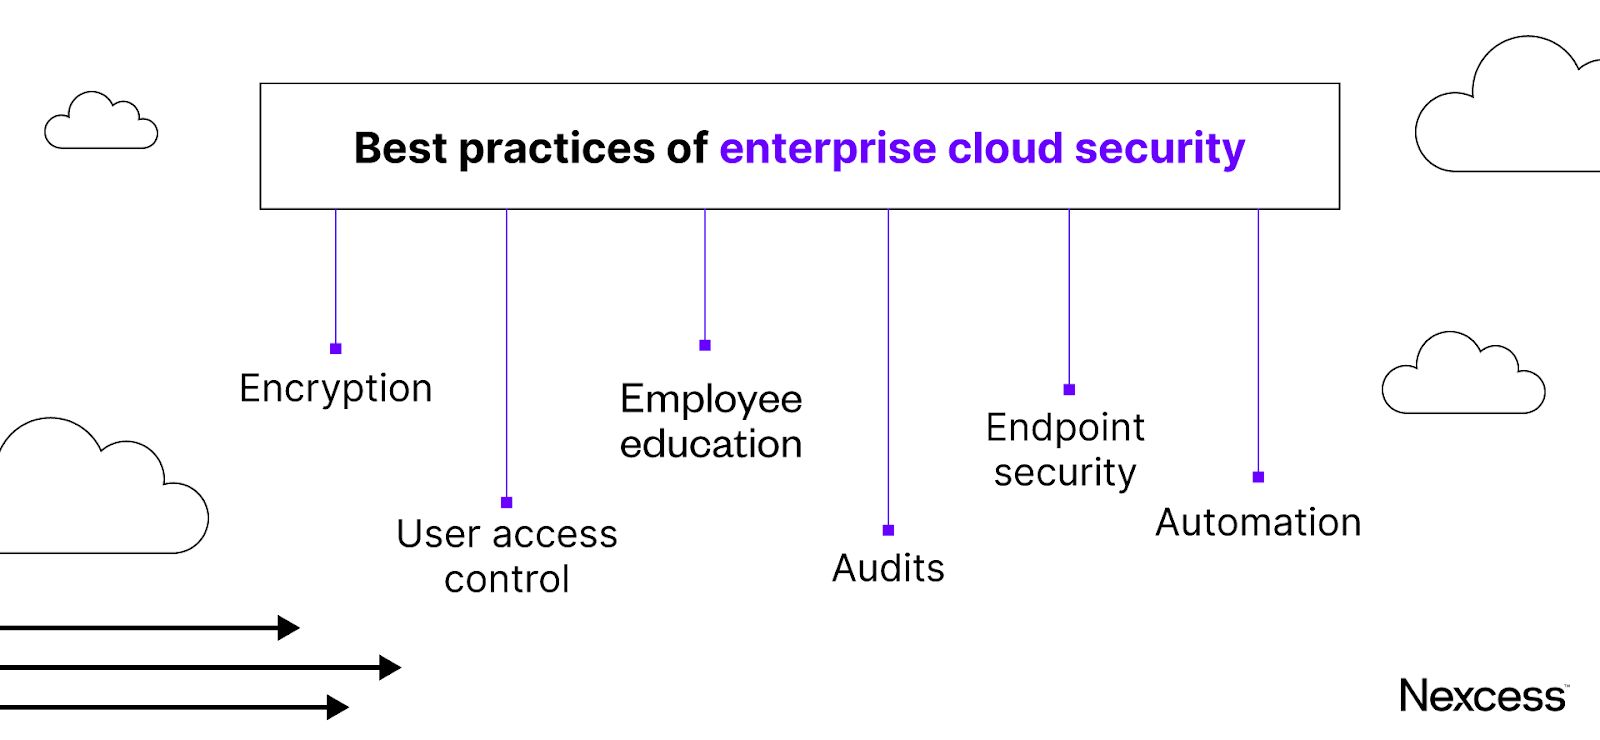 Best practices of enterprise cloud security include encryption, user access control, audits, and automation.